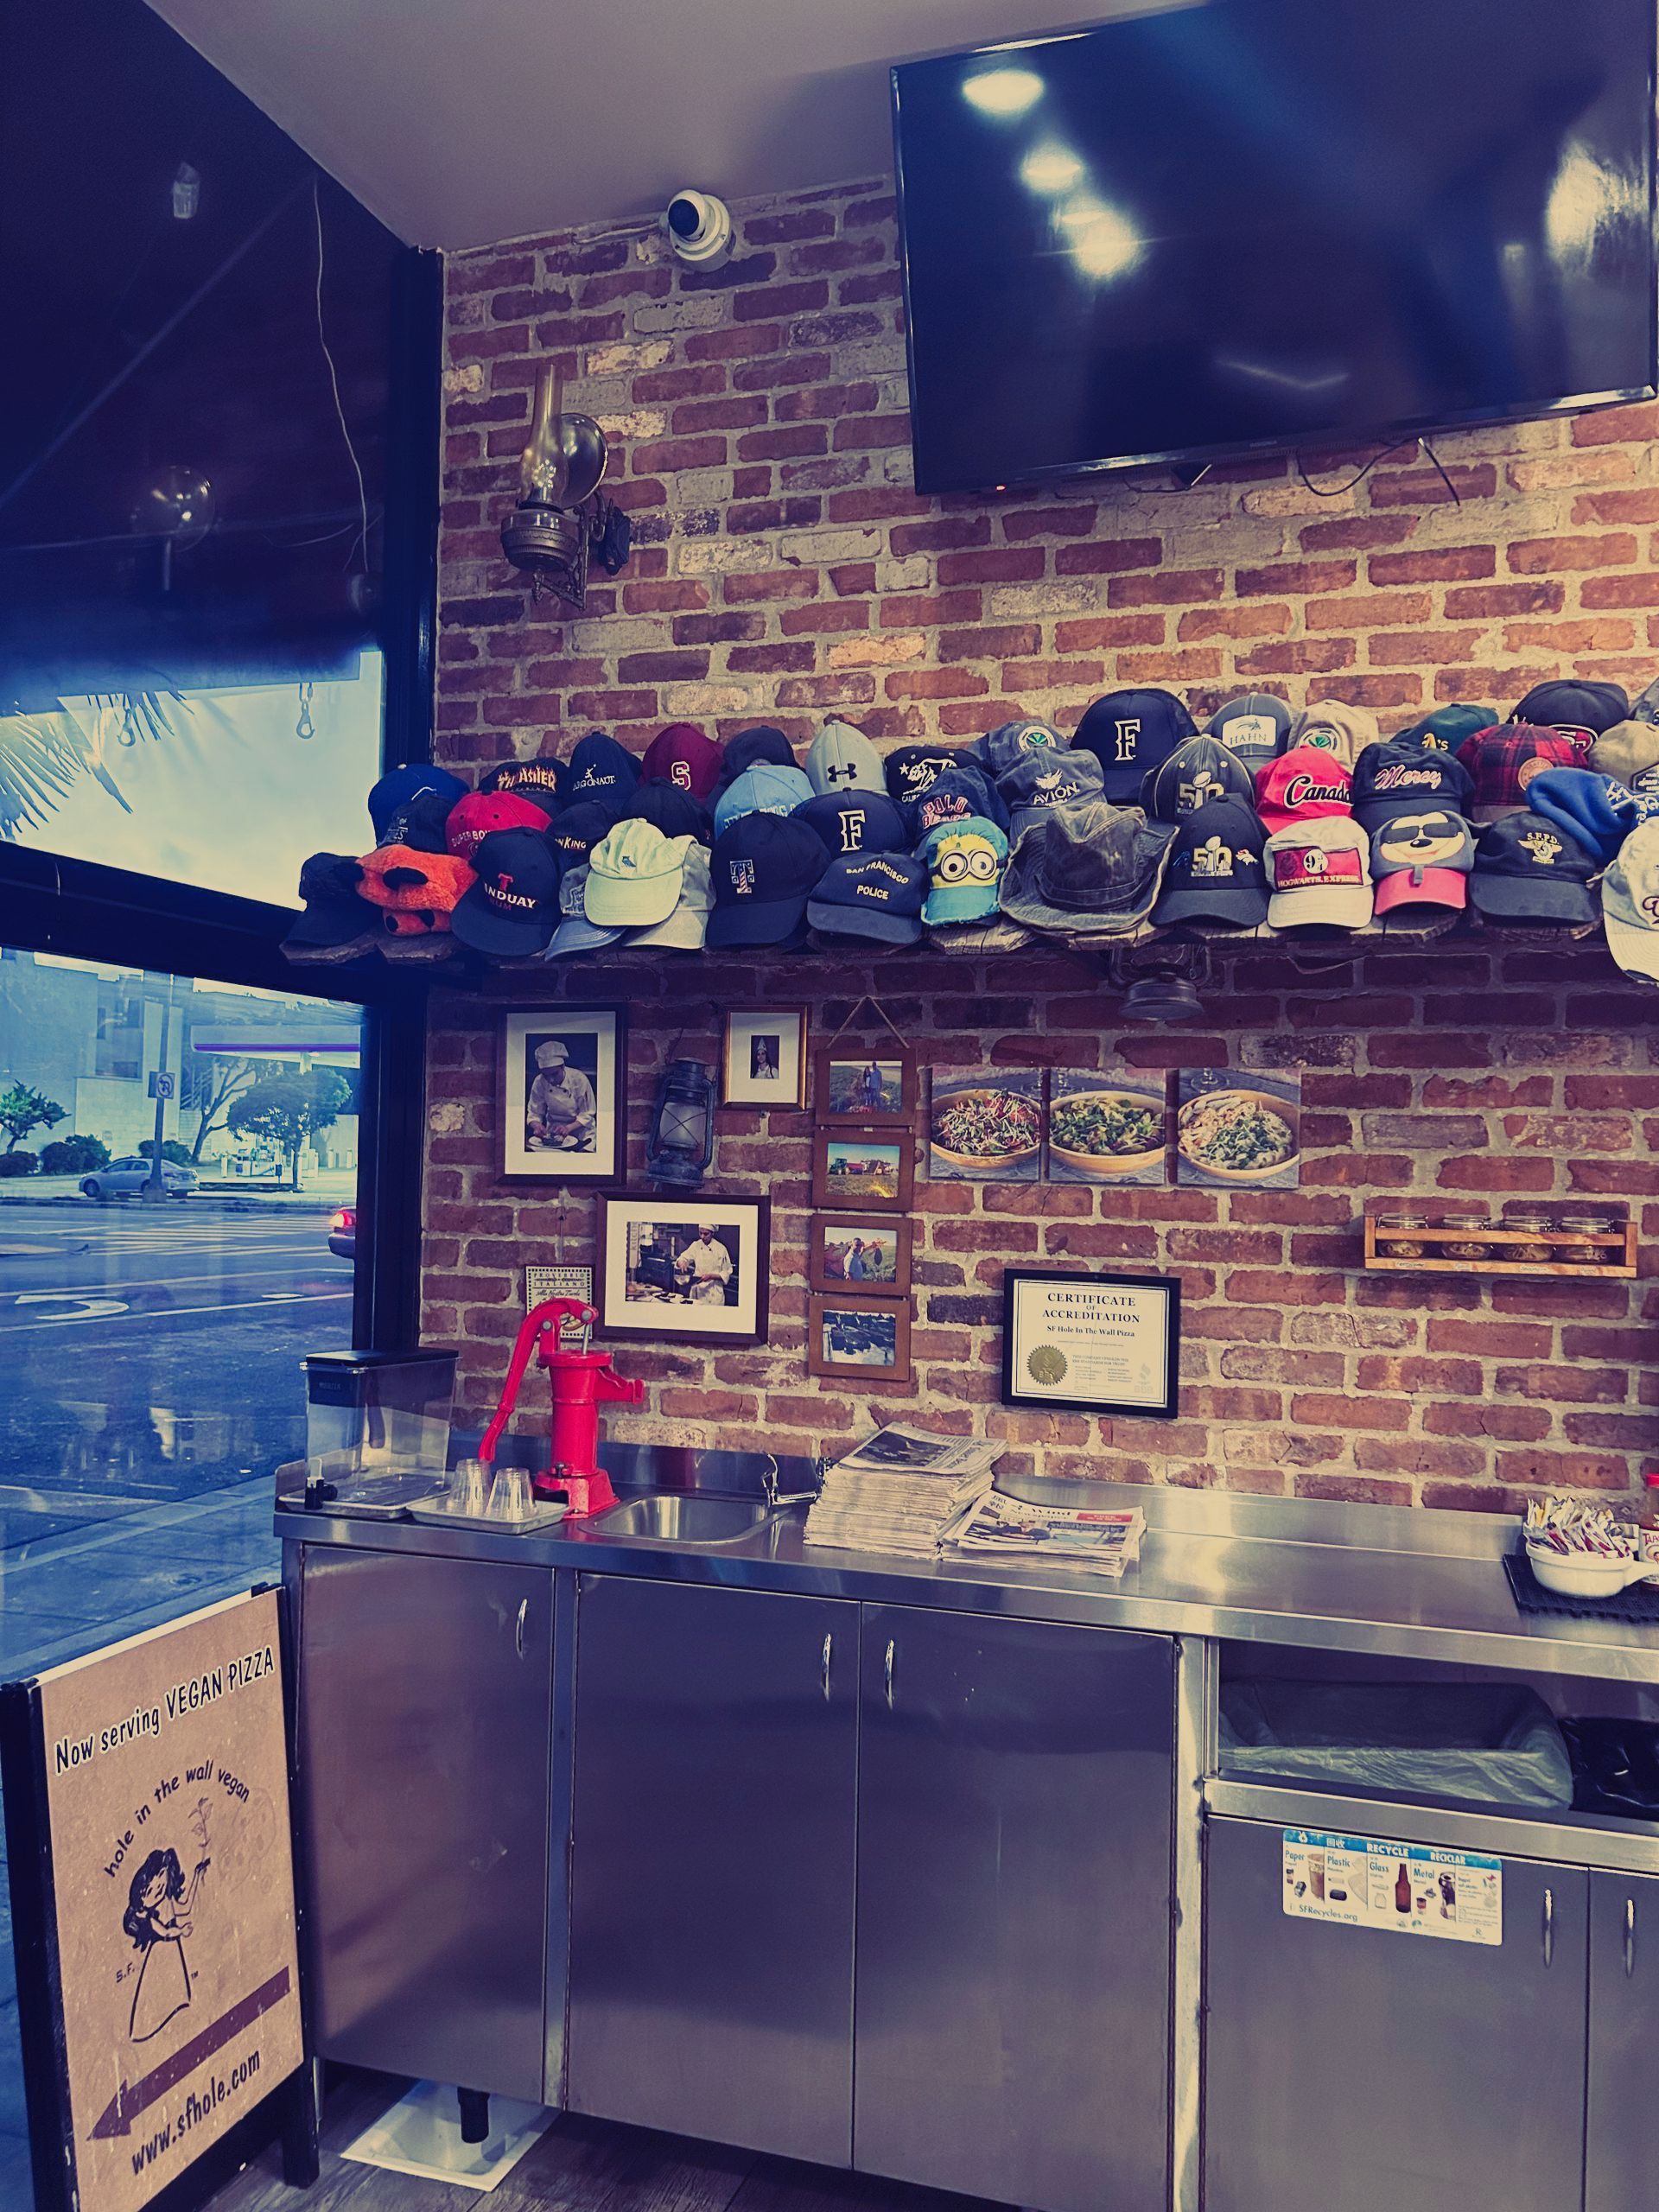 A brick wall with a lot of hats on it